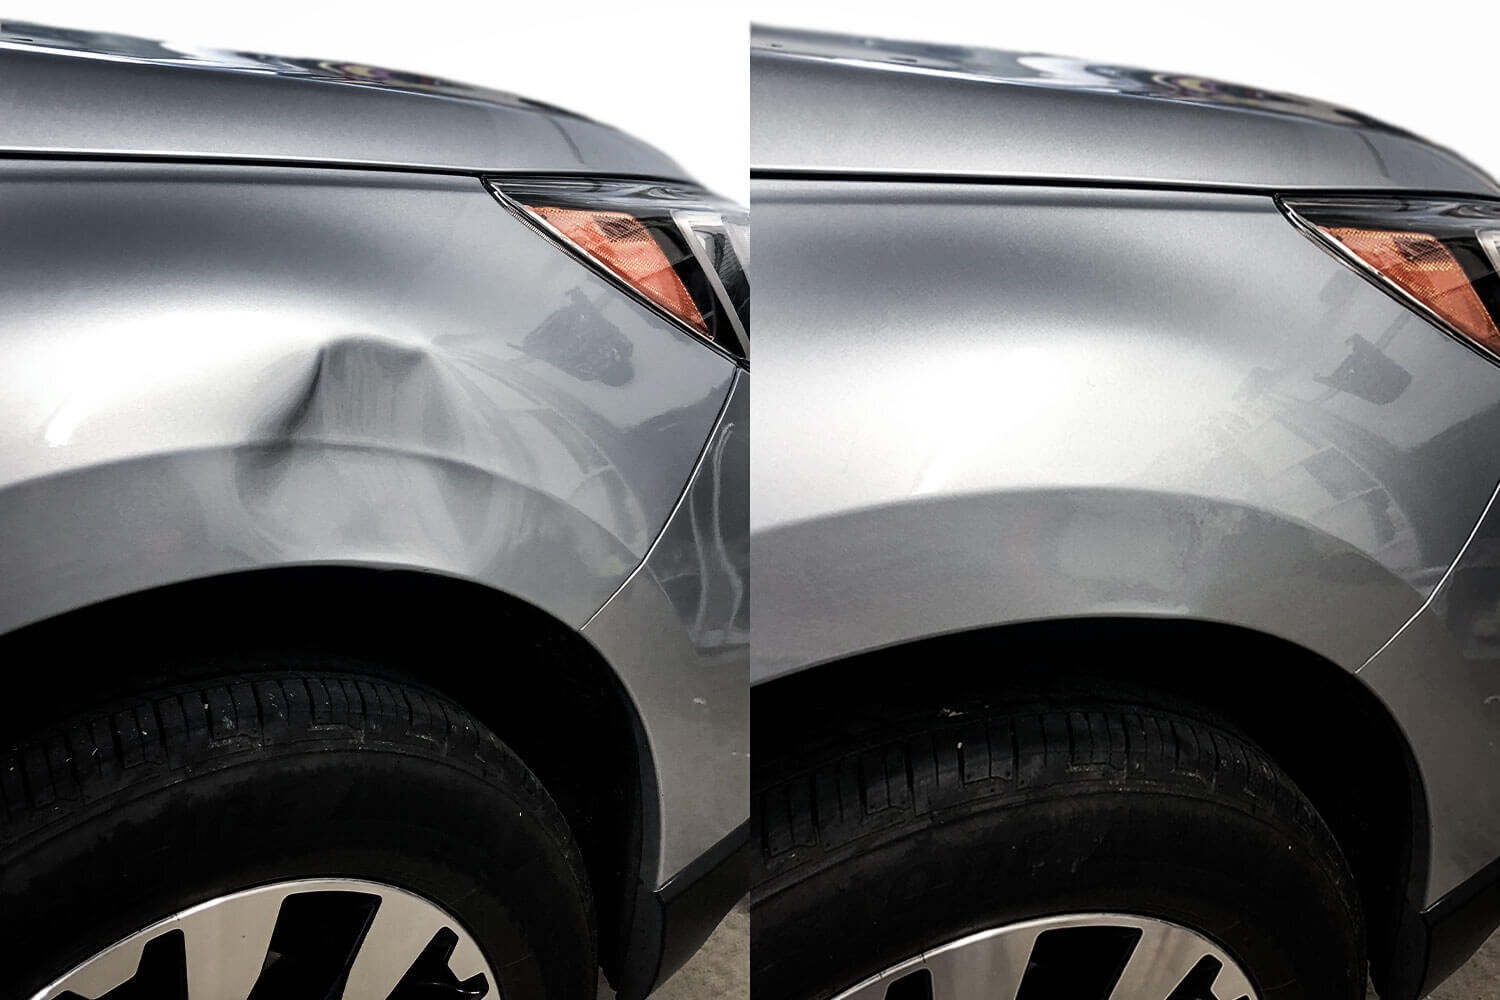  More About Auto Dent Removal Near Me  thumbnail